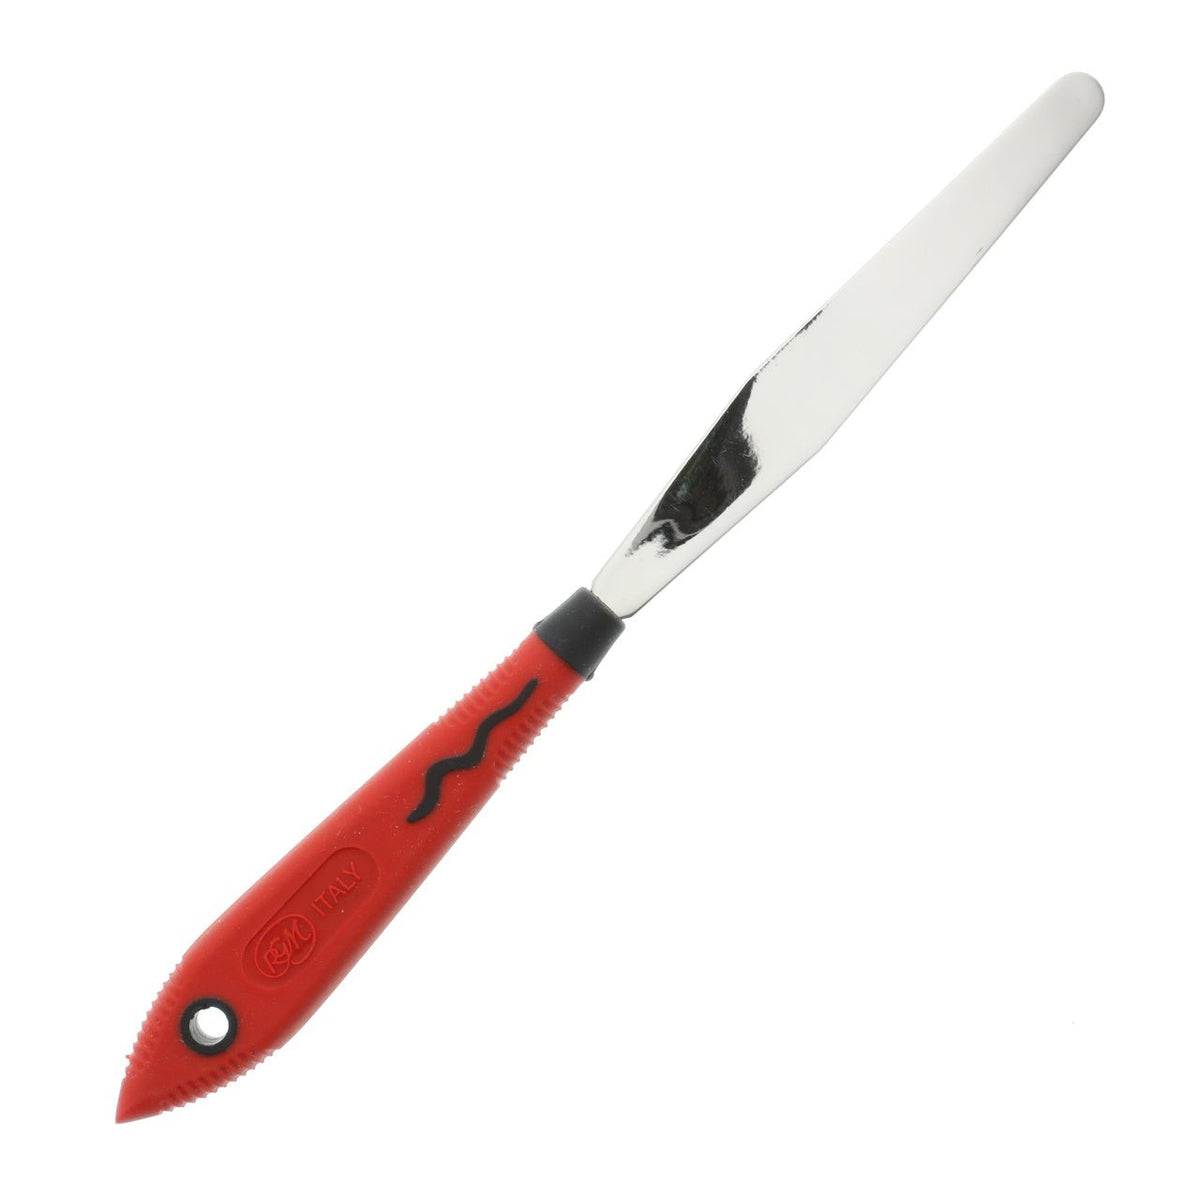 RGM Soft Grip Painting Knife #110 (Red Handle) - merriartist.com